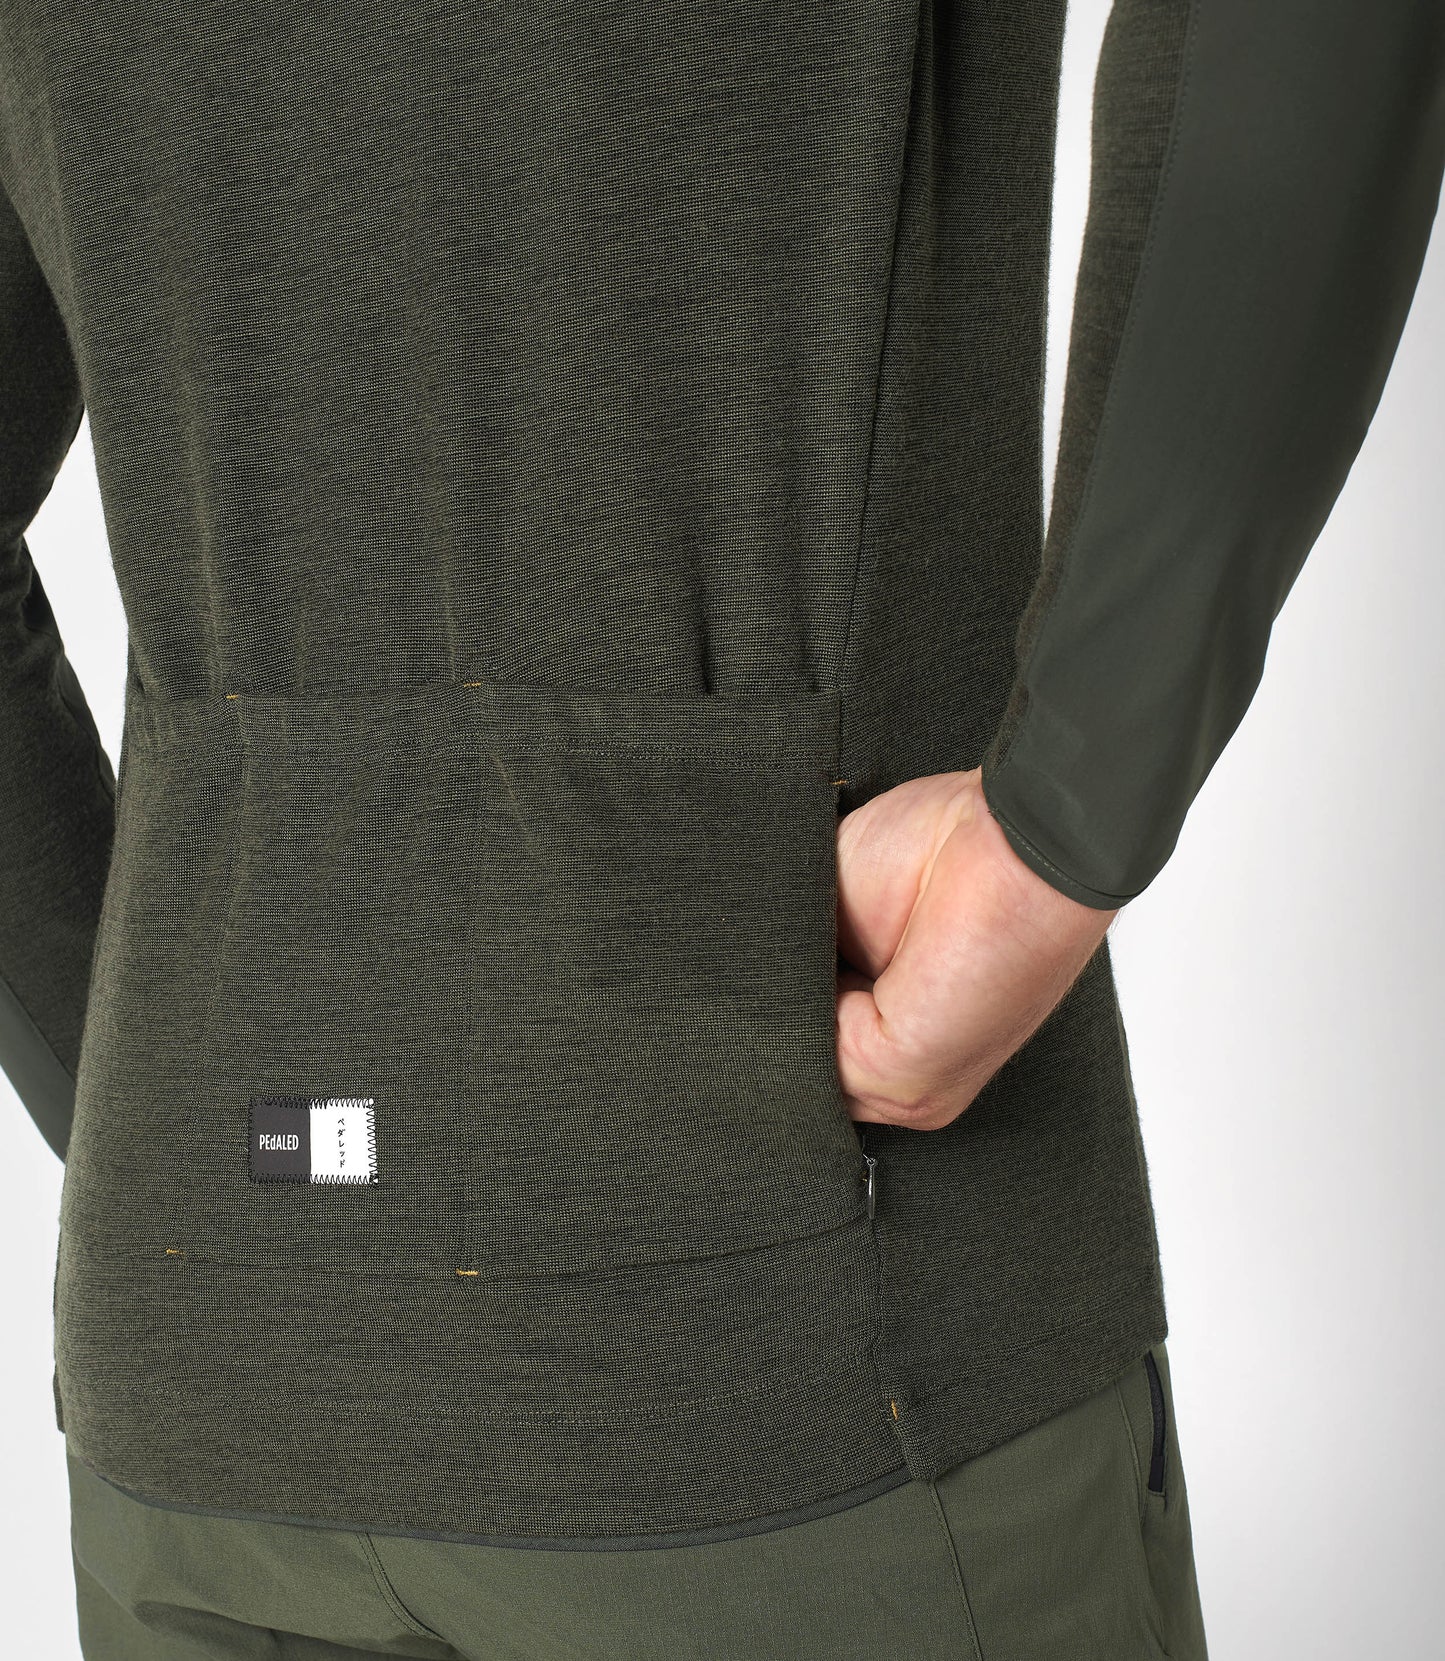 23WHJJA20PE_8_men cycling merino jersey hooded military green jary side pocket pedaled